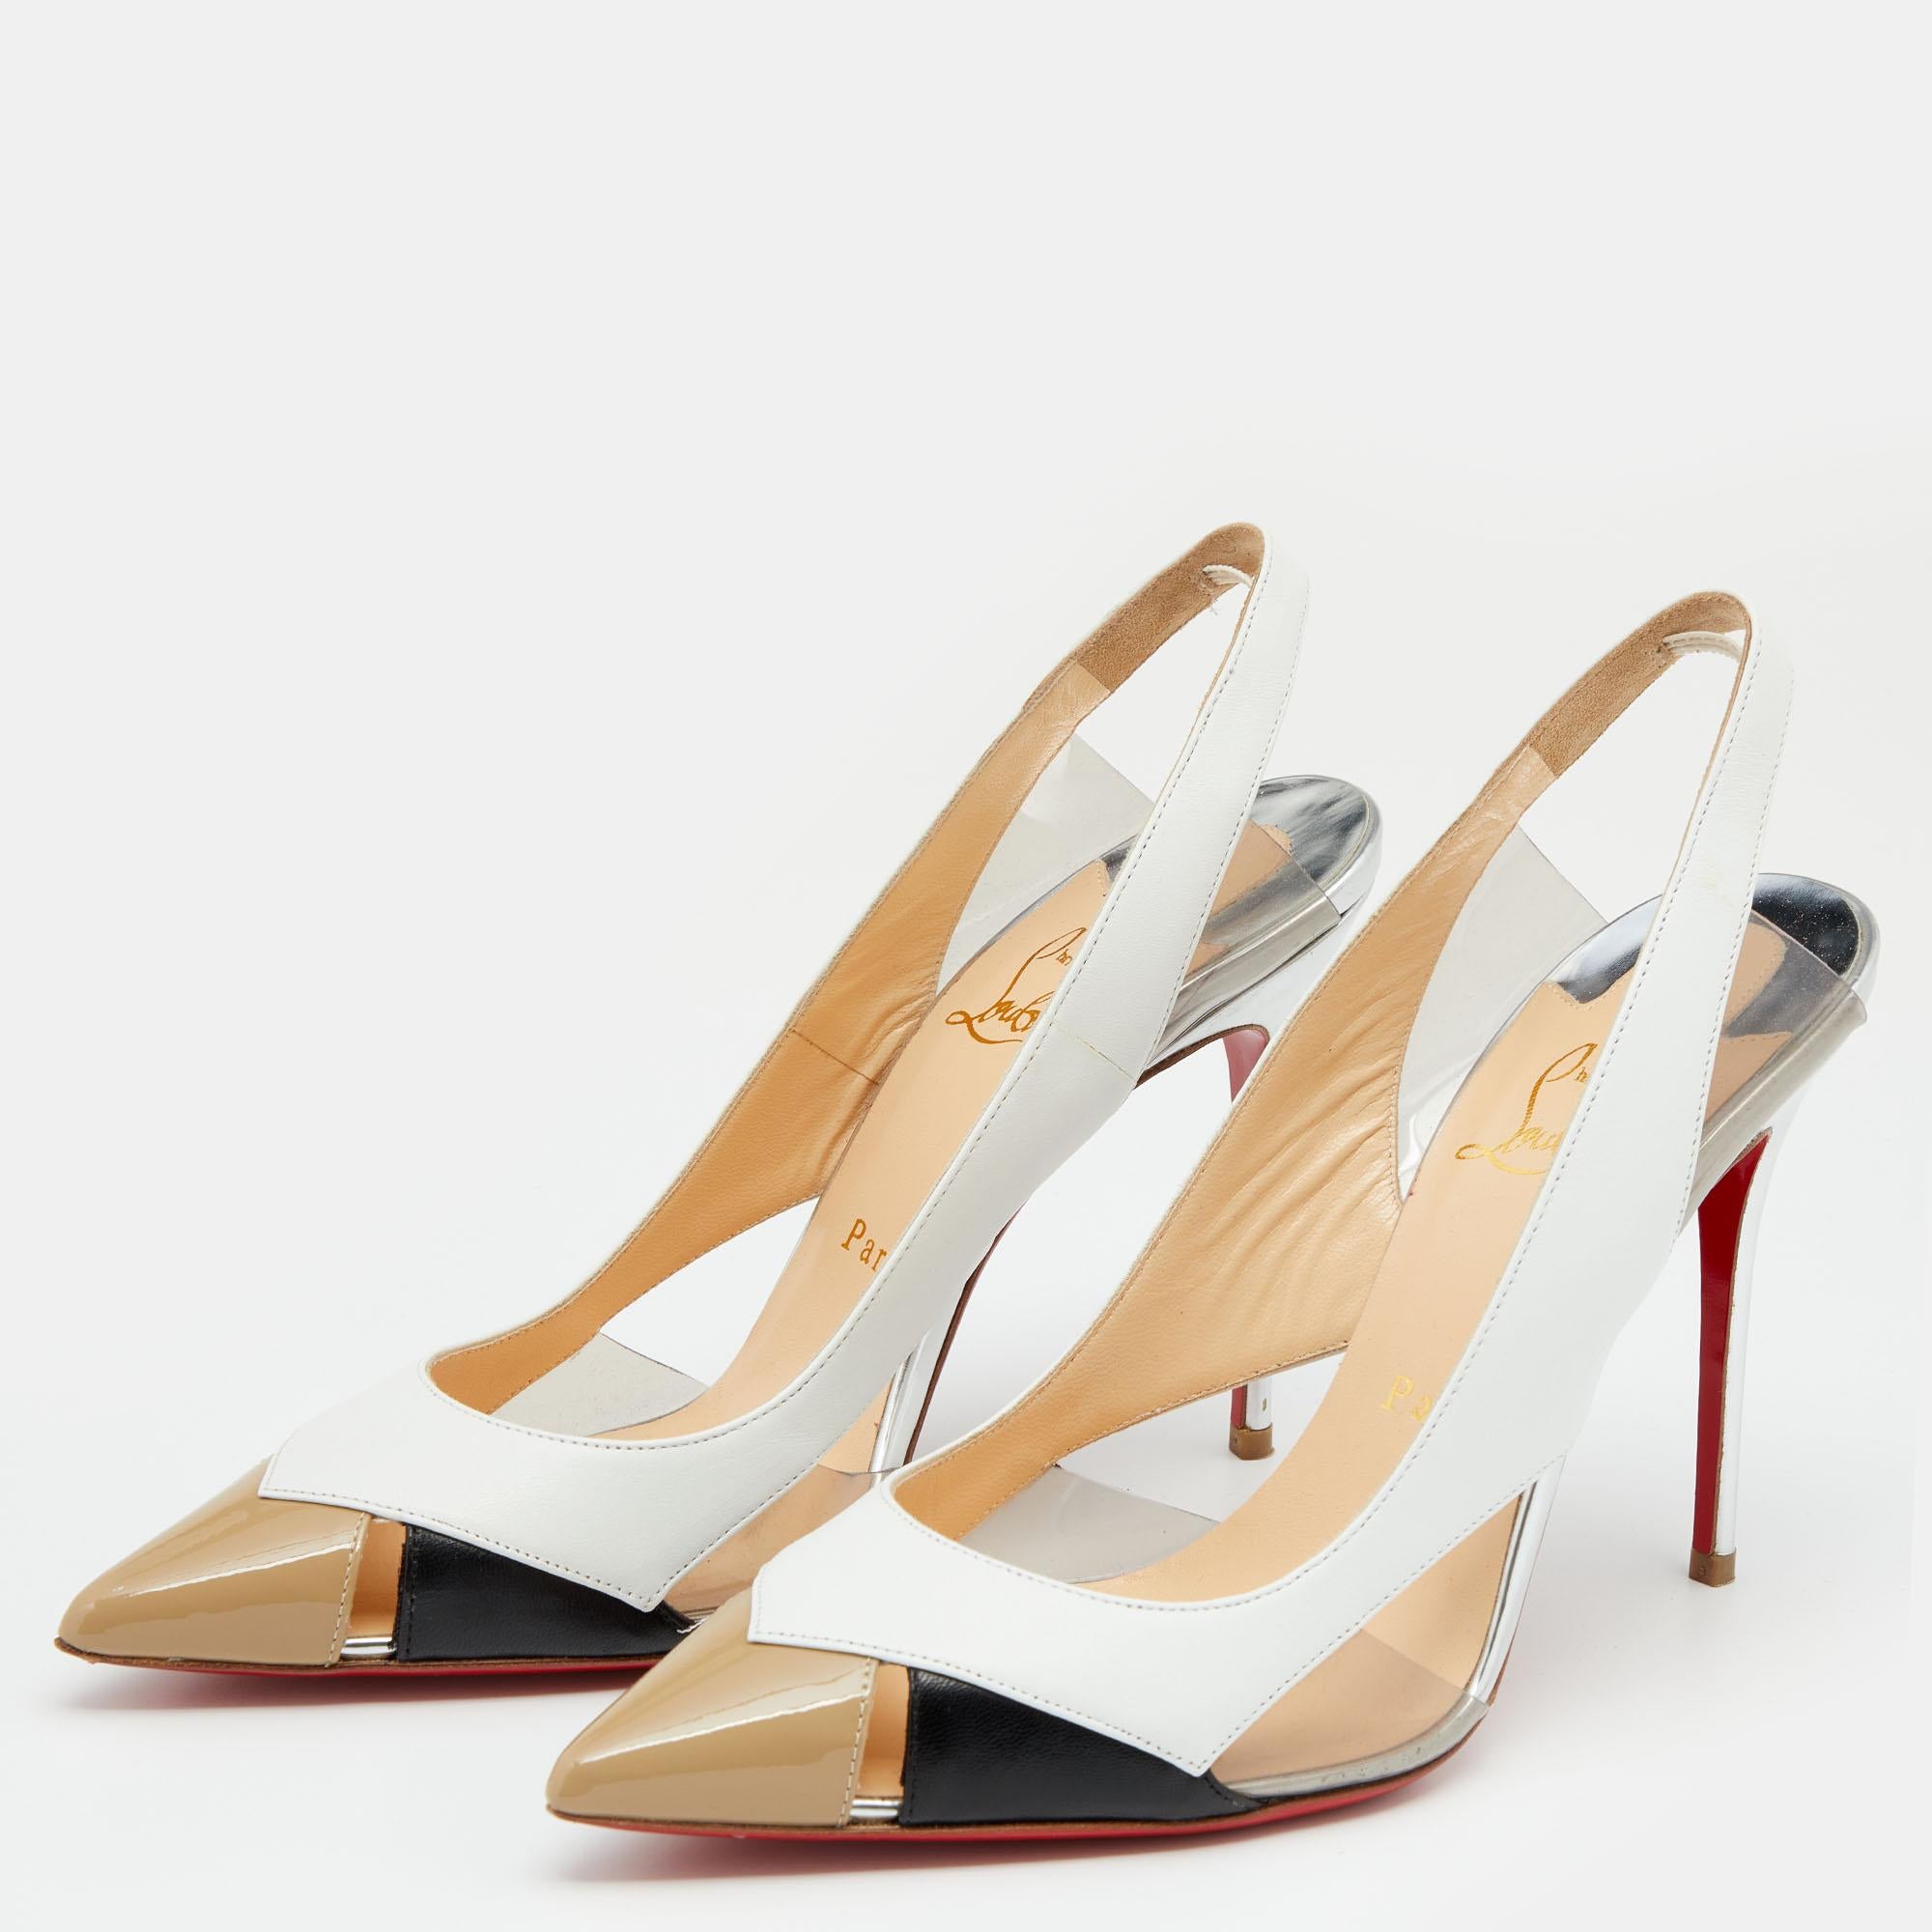 These pumps from the house of Christian Louboutin are great for any occasion. They feature a sharp pointed toe, clear PVC panels on the sides, and covered heels. They come with a labeled insole and the signature red sole that makes this exquisite